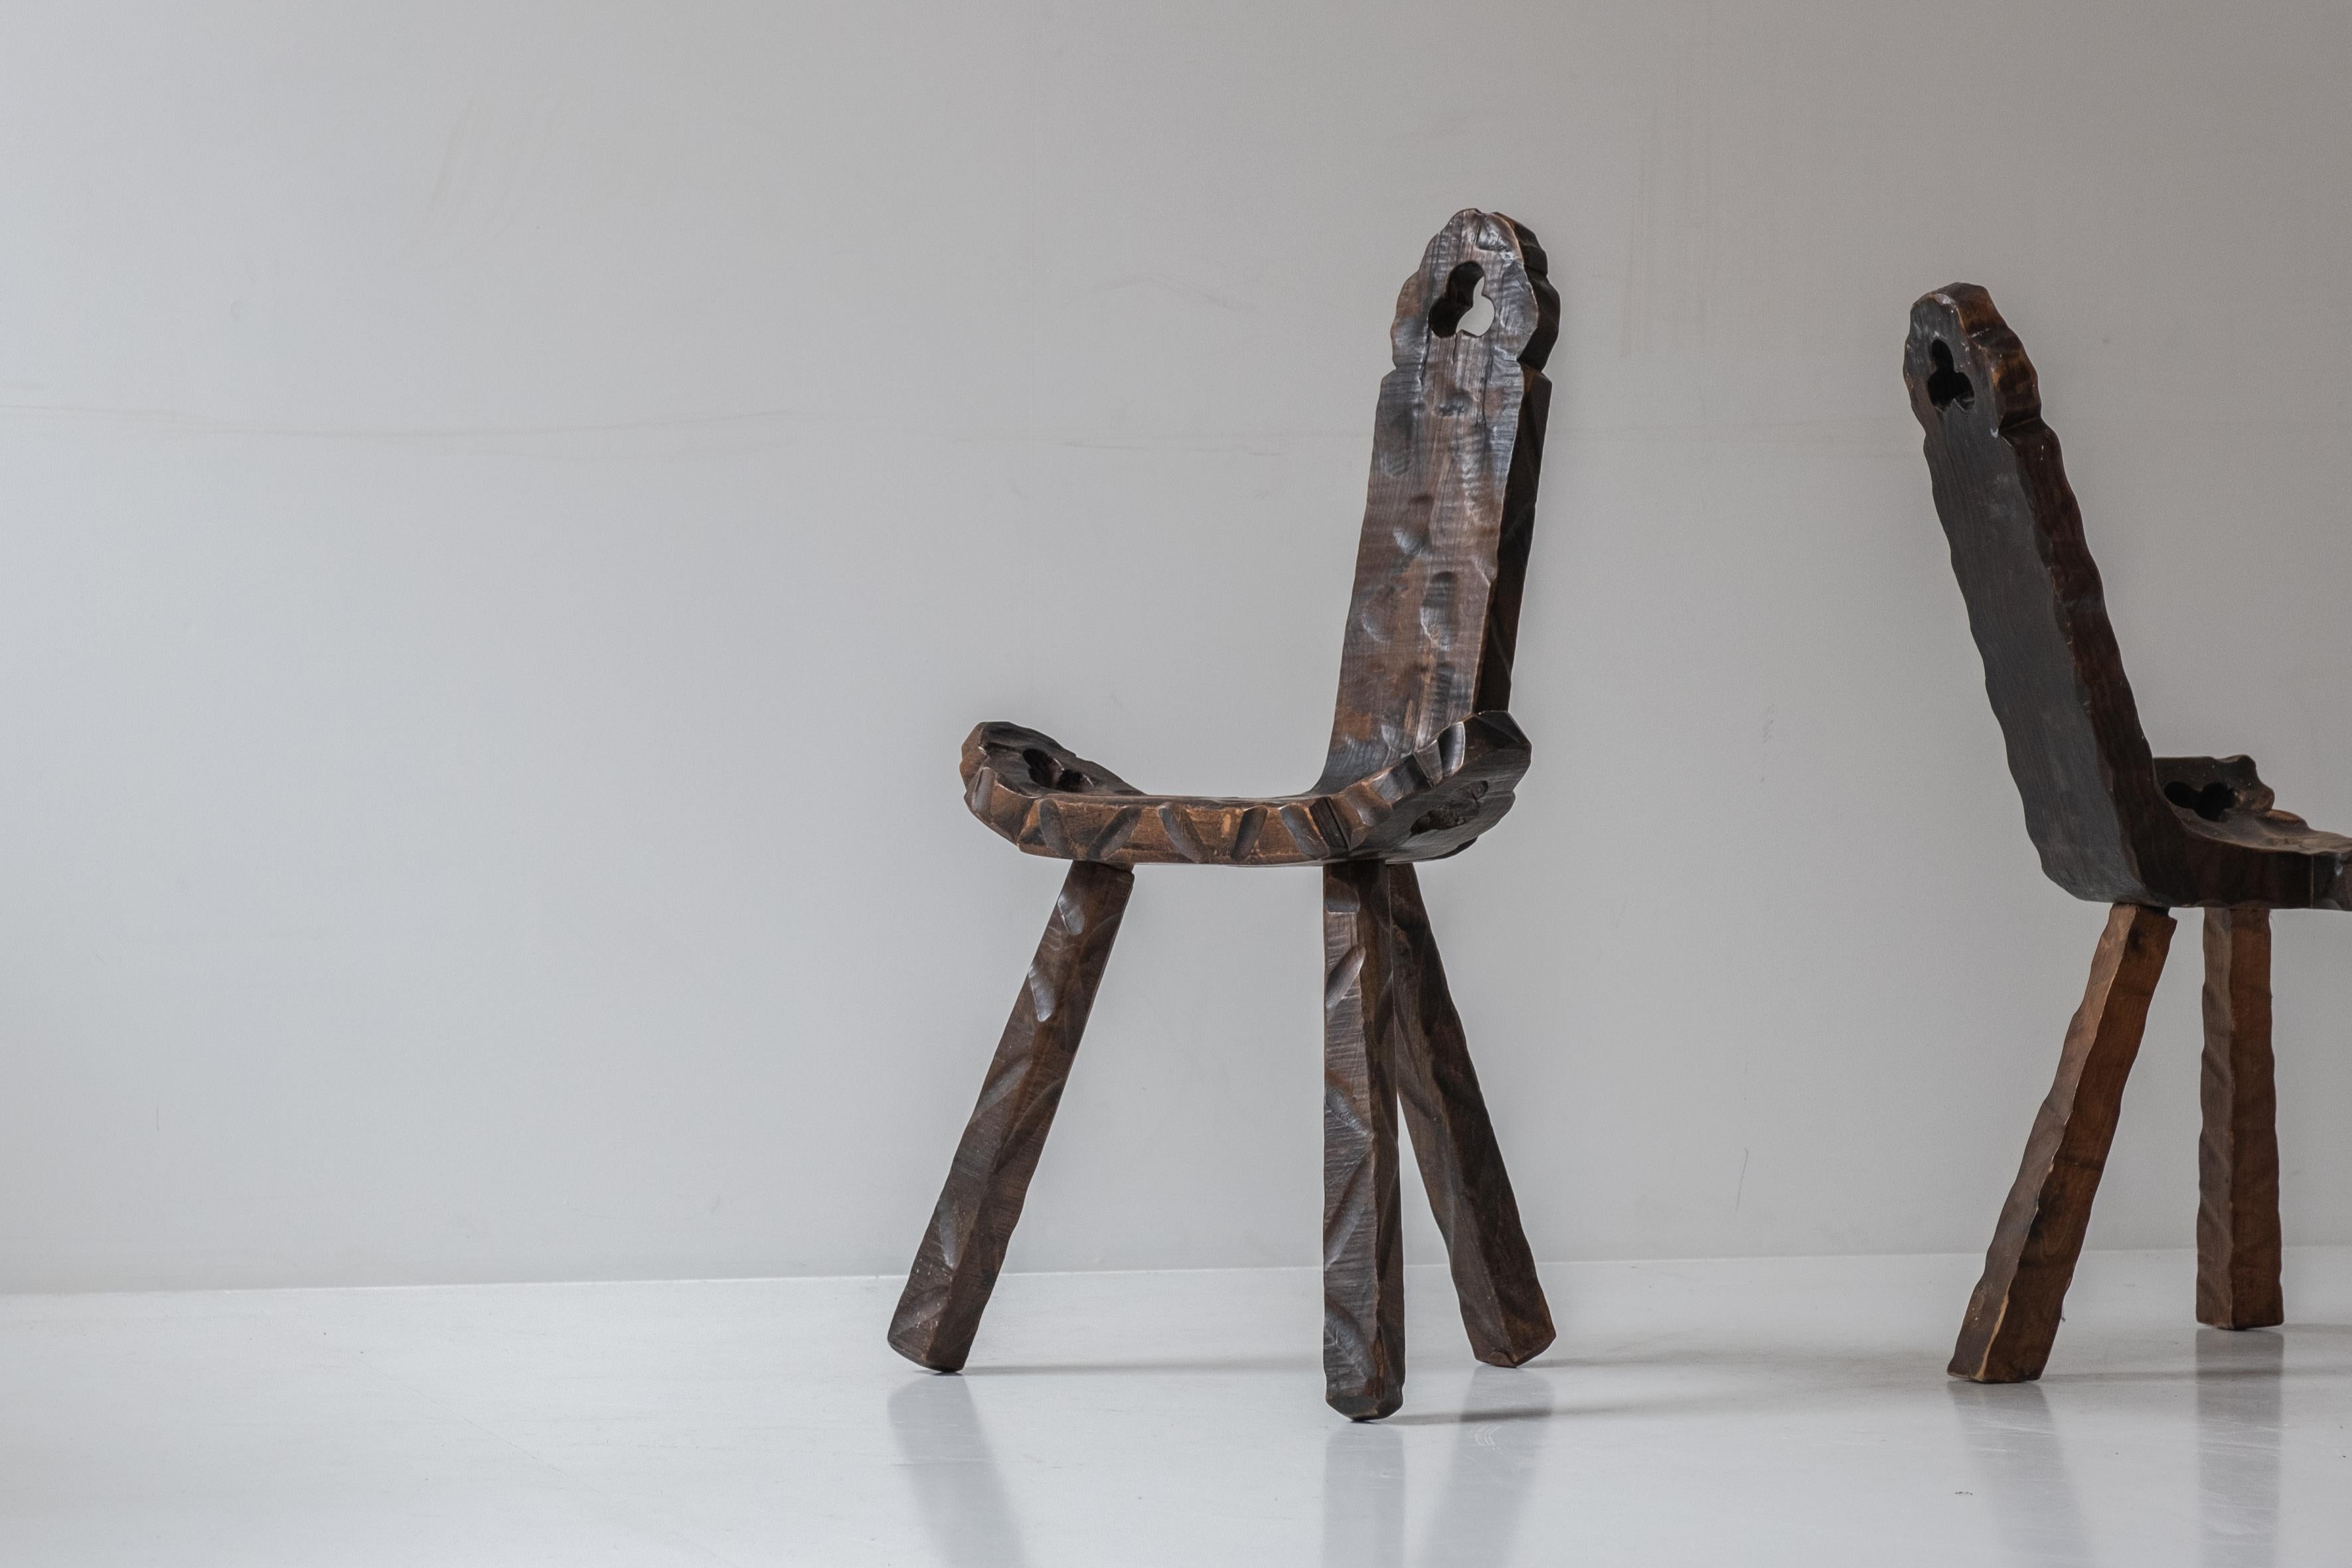 Set of 2 Brutalist tripod stools from Spain, designed in the 1960s.  1